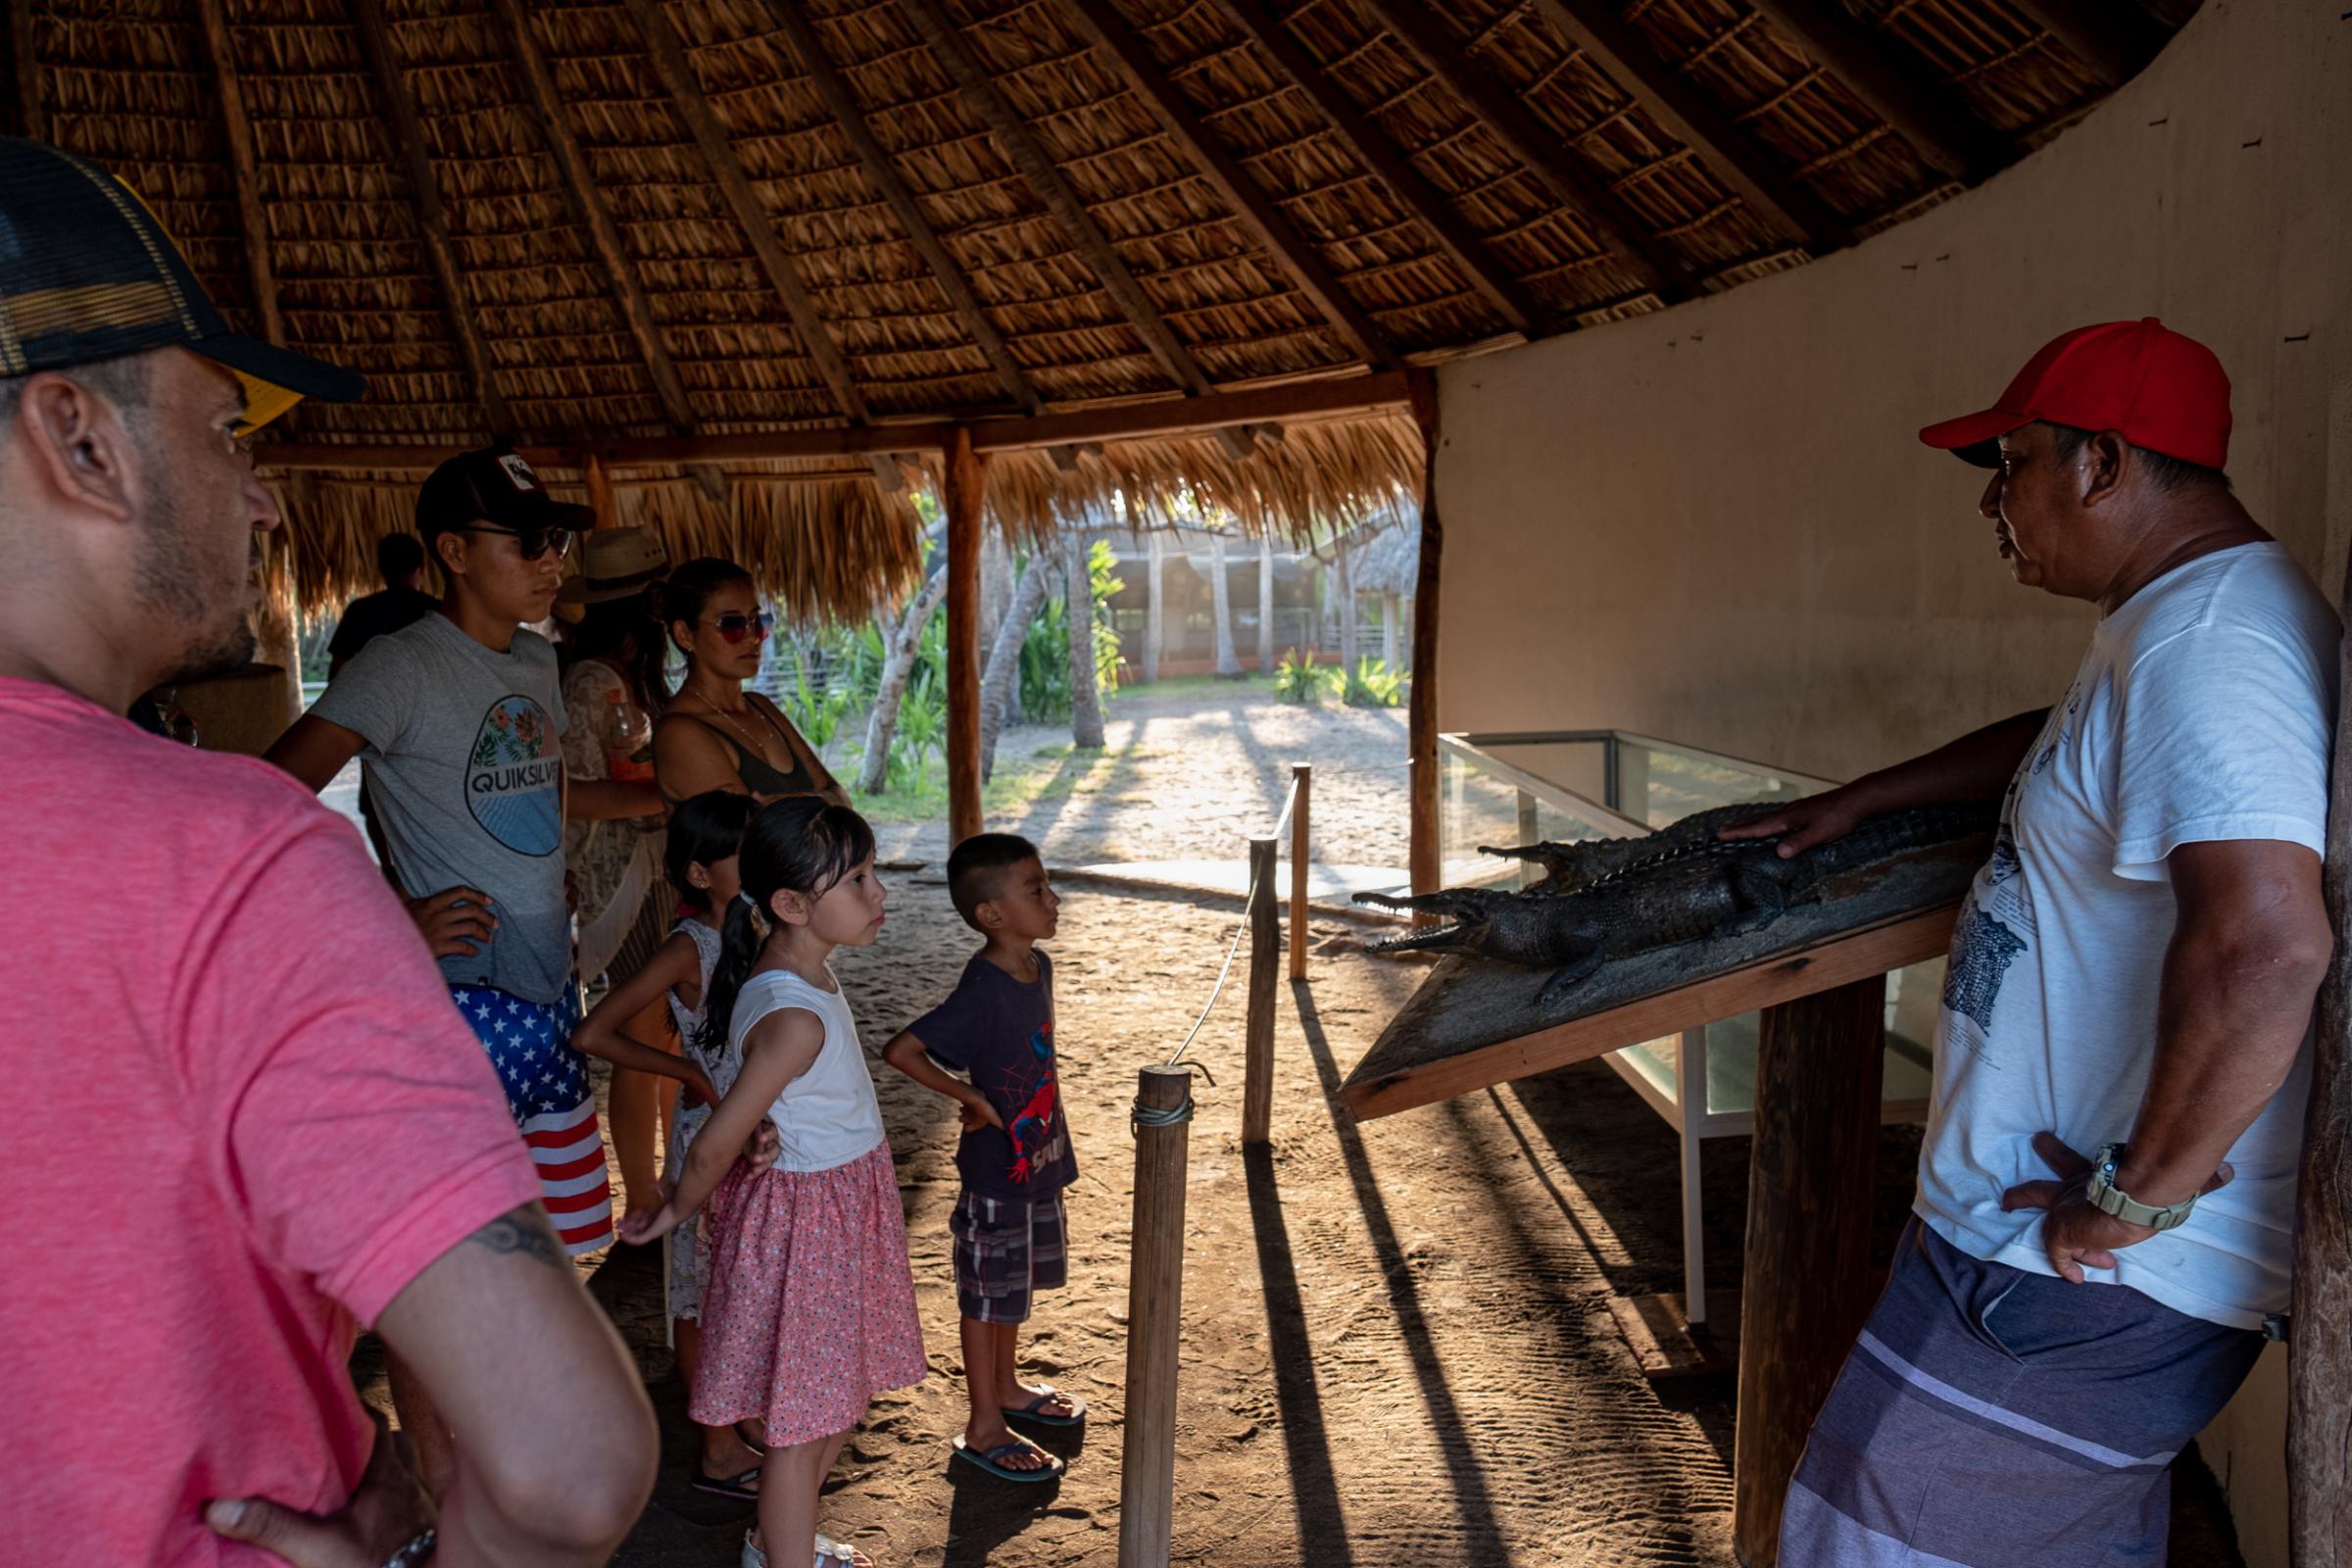 La Ventanilla: A window to coexisting with Crocodiles  - Environmental educations has become key for the project being developed at La Ventanilla by the...